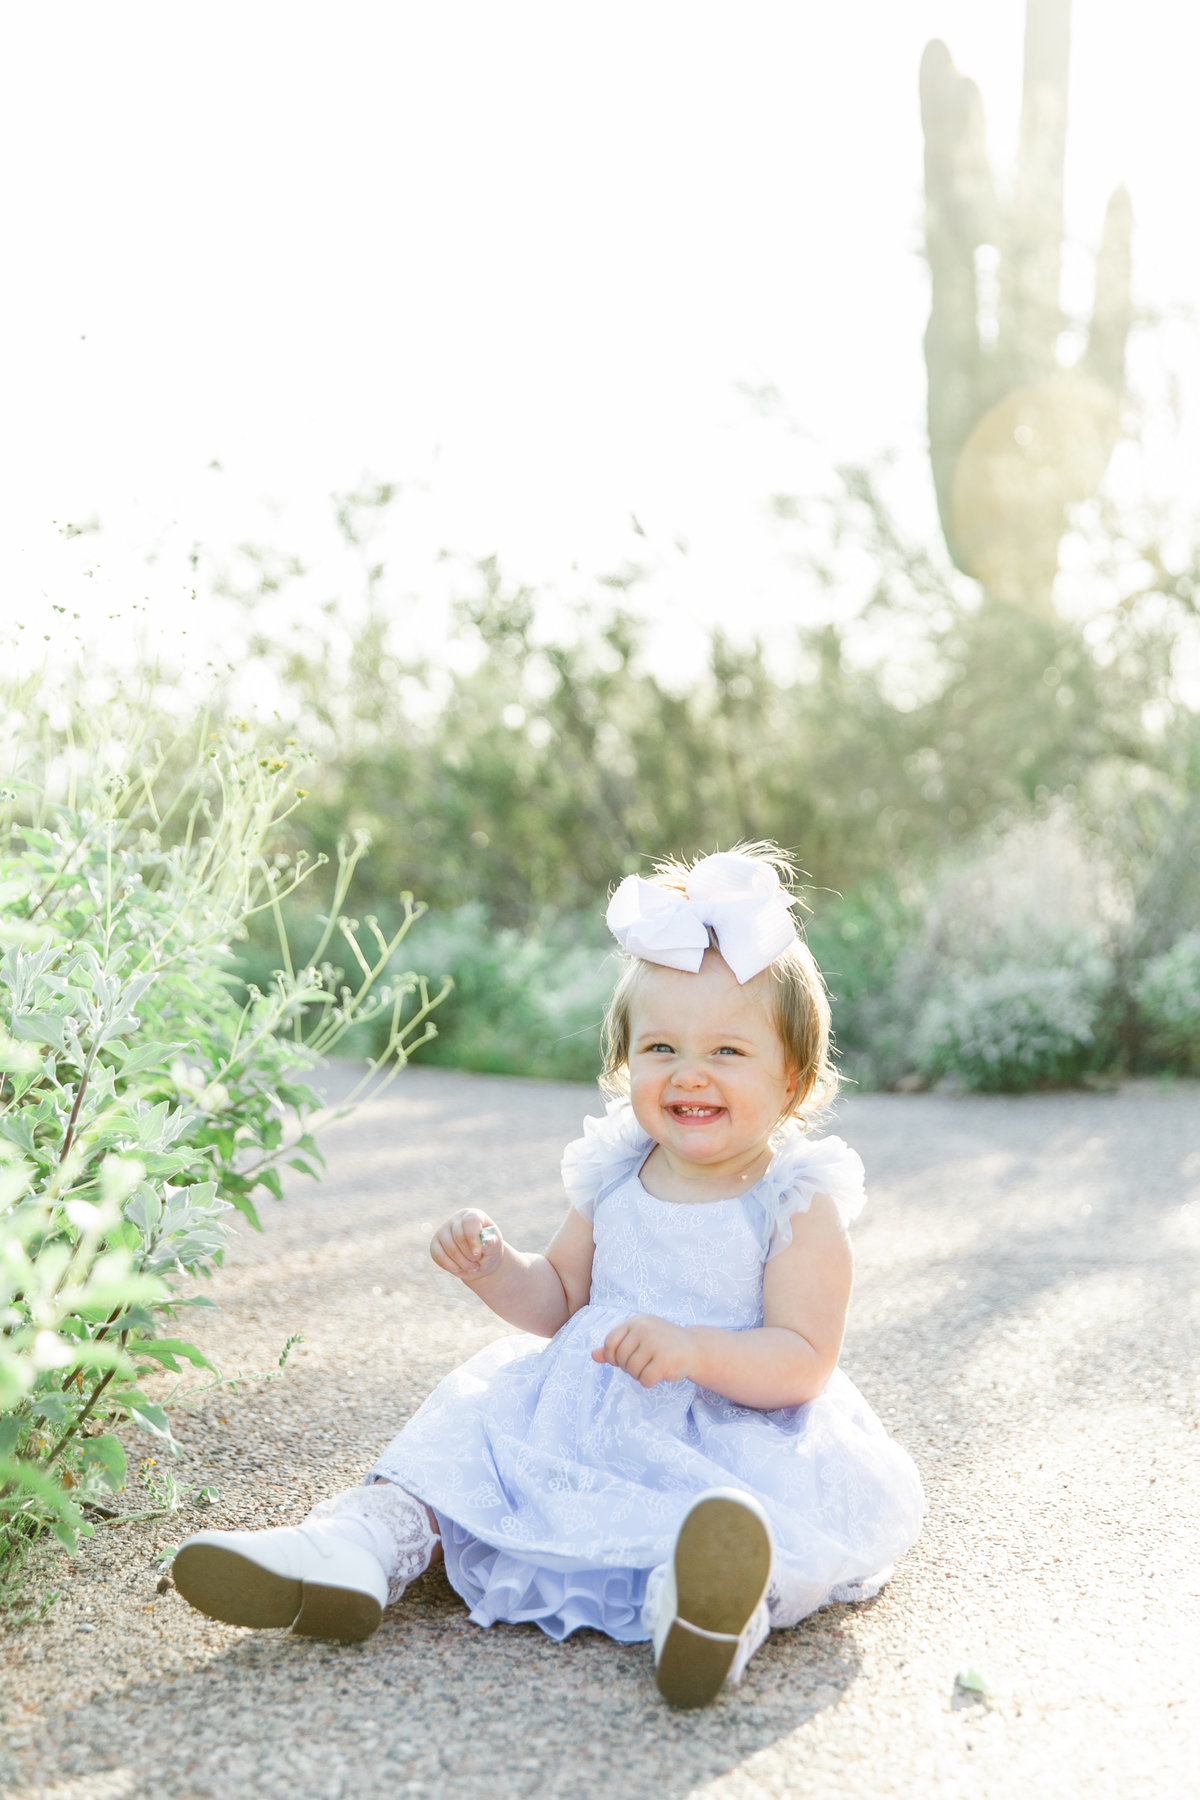 Karlie Colleen Photography - Scottsdale family photography - Dymin & family-73